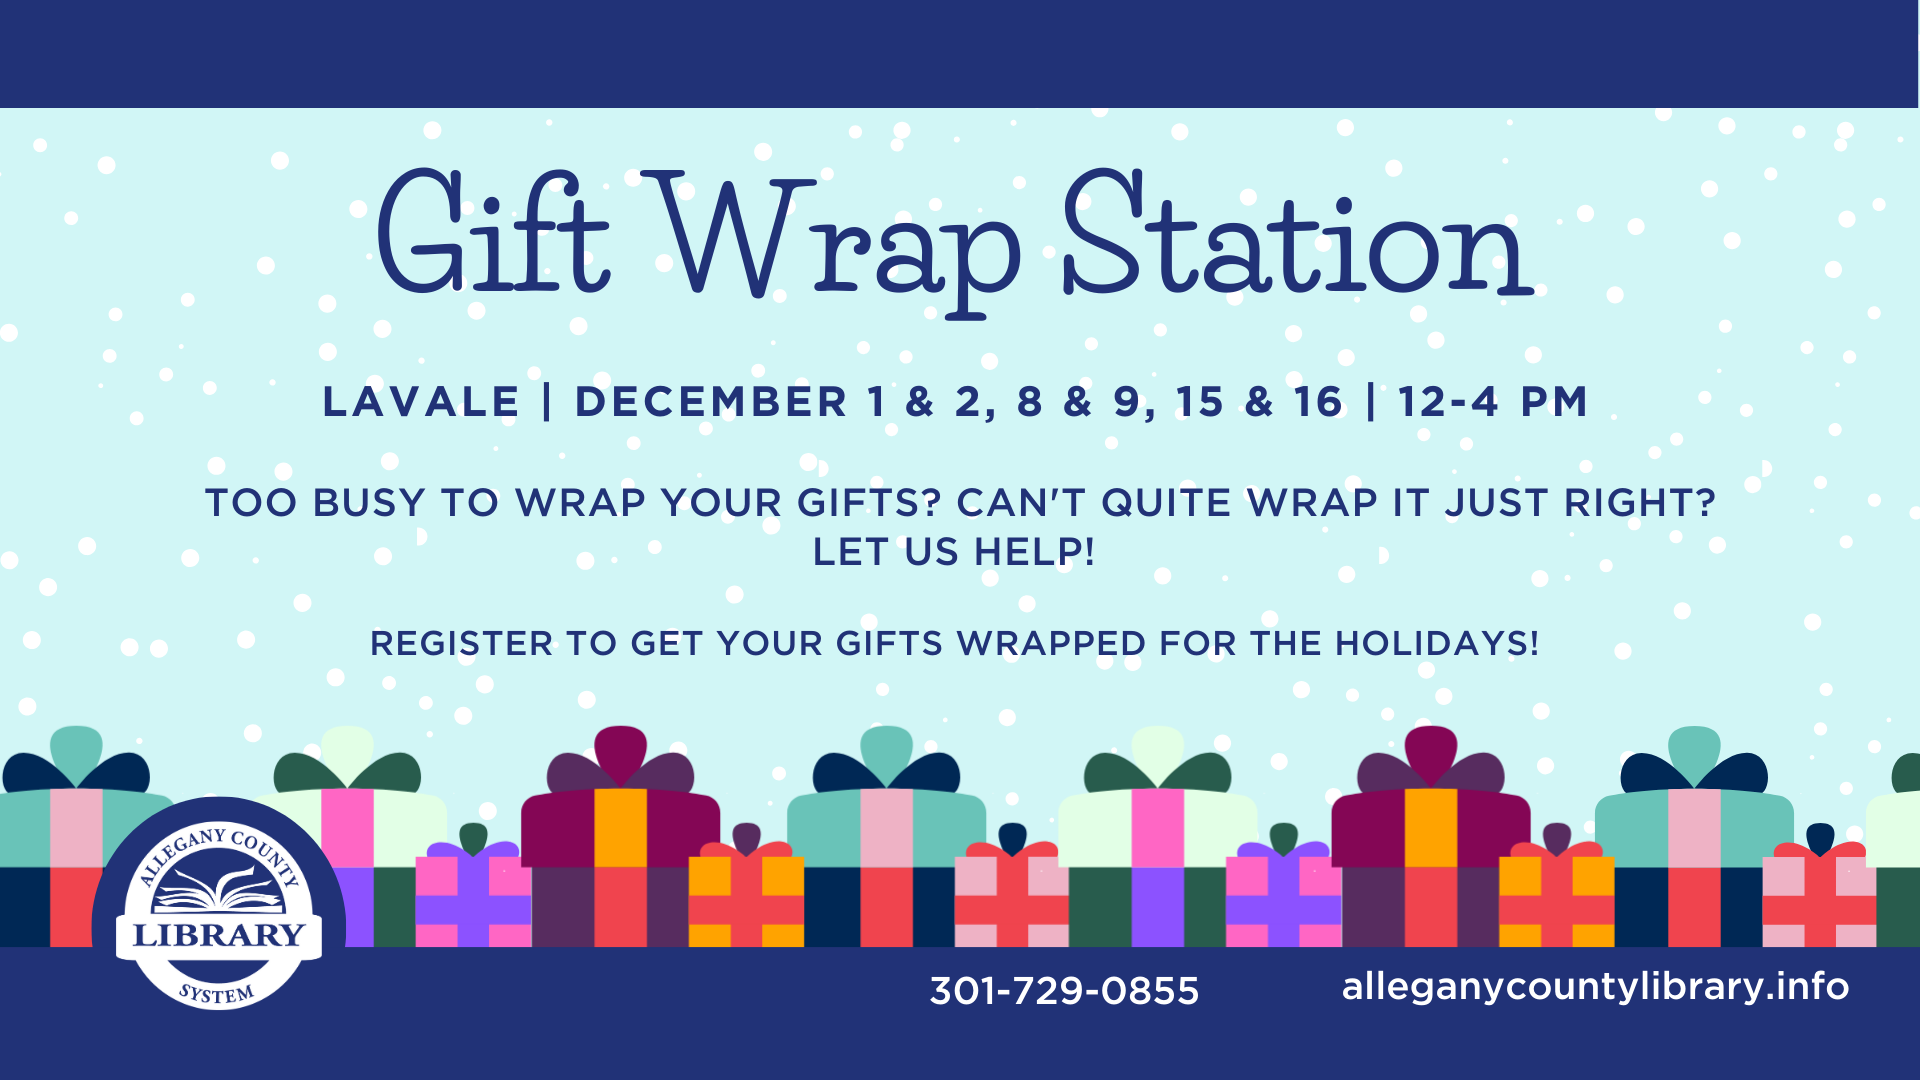 Promotional photo with details regarding the gift wrap station. Cartoon gifts border the bottom of the event details.